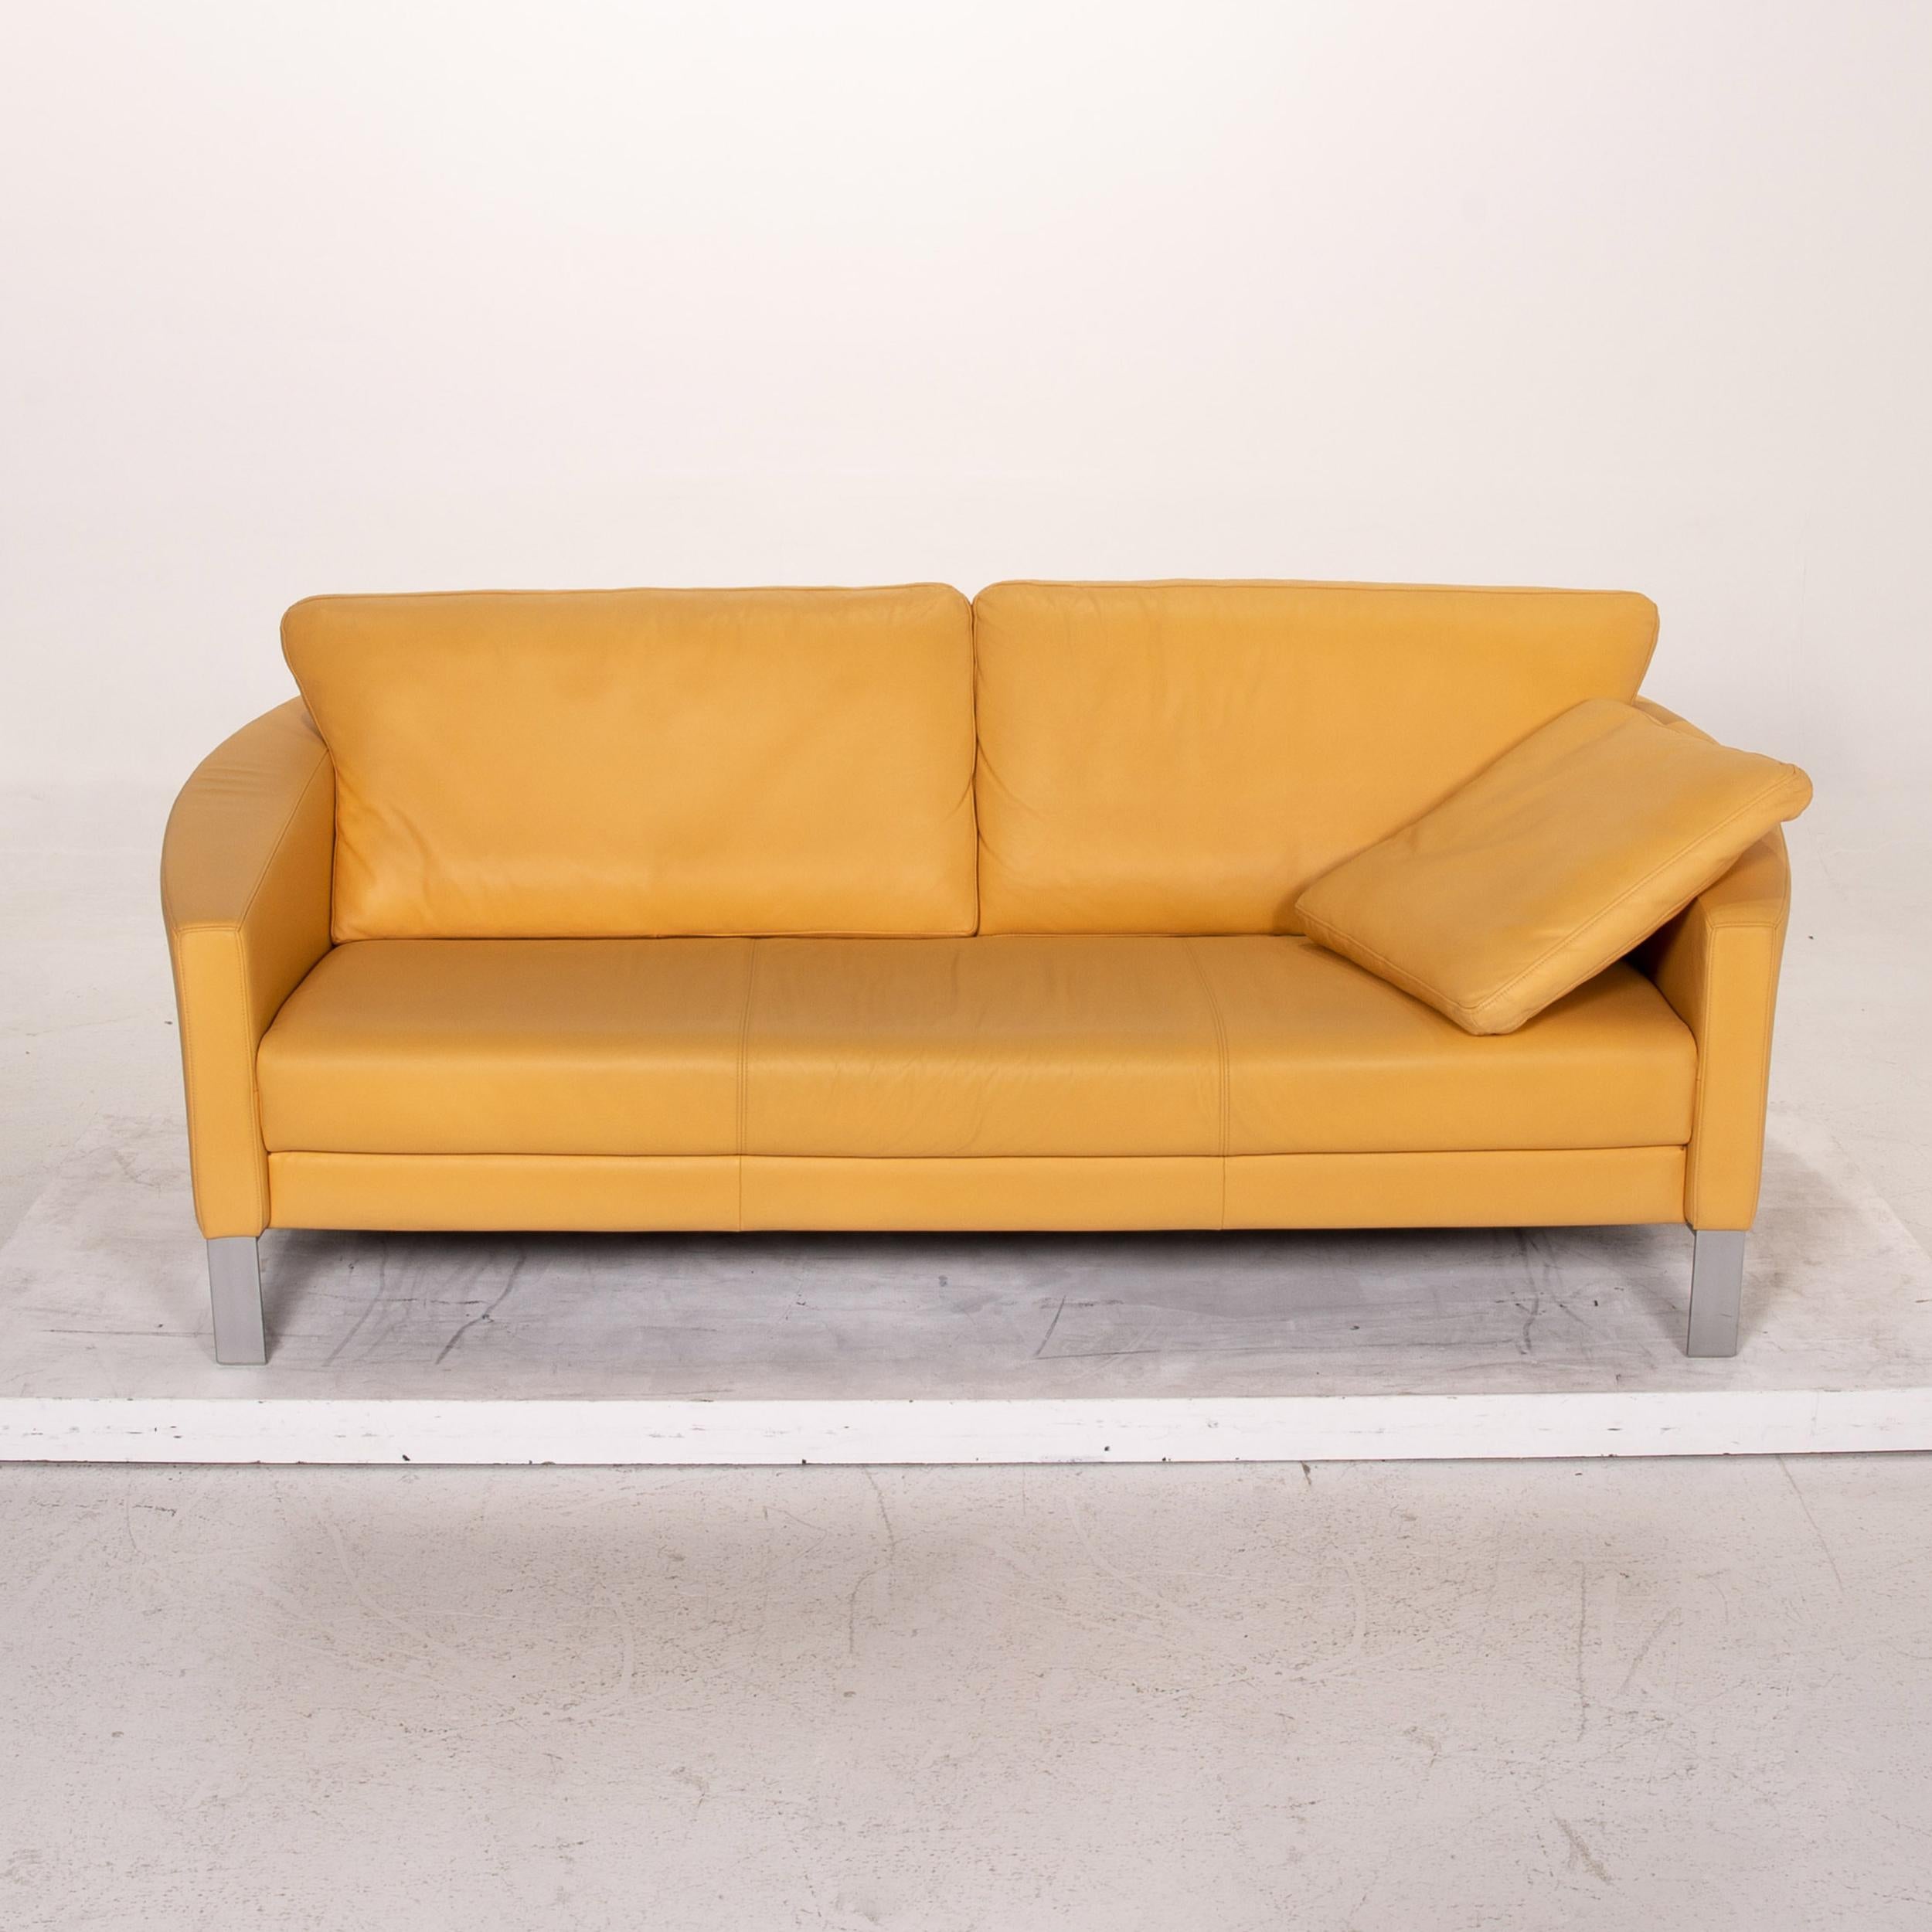 Rolf Benz Leather Sofa Yellow Three-Seat Couch For Sale 1